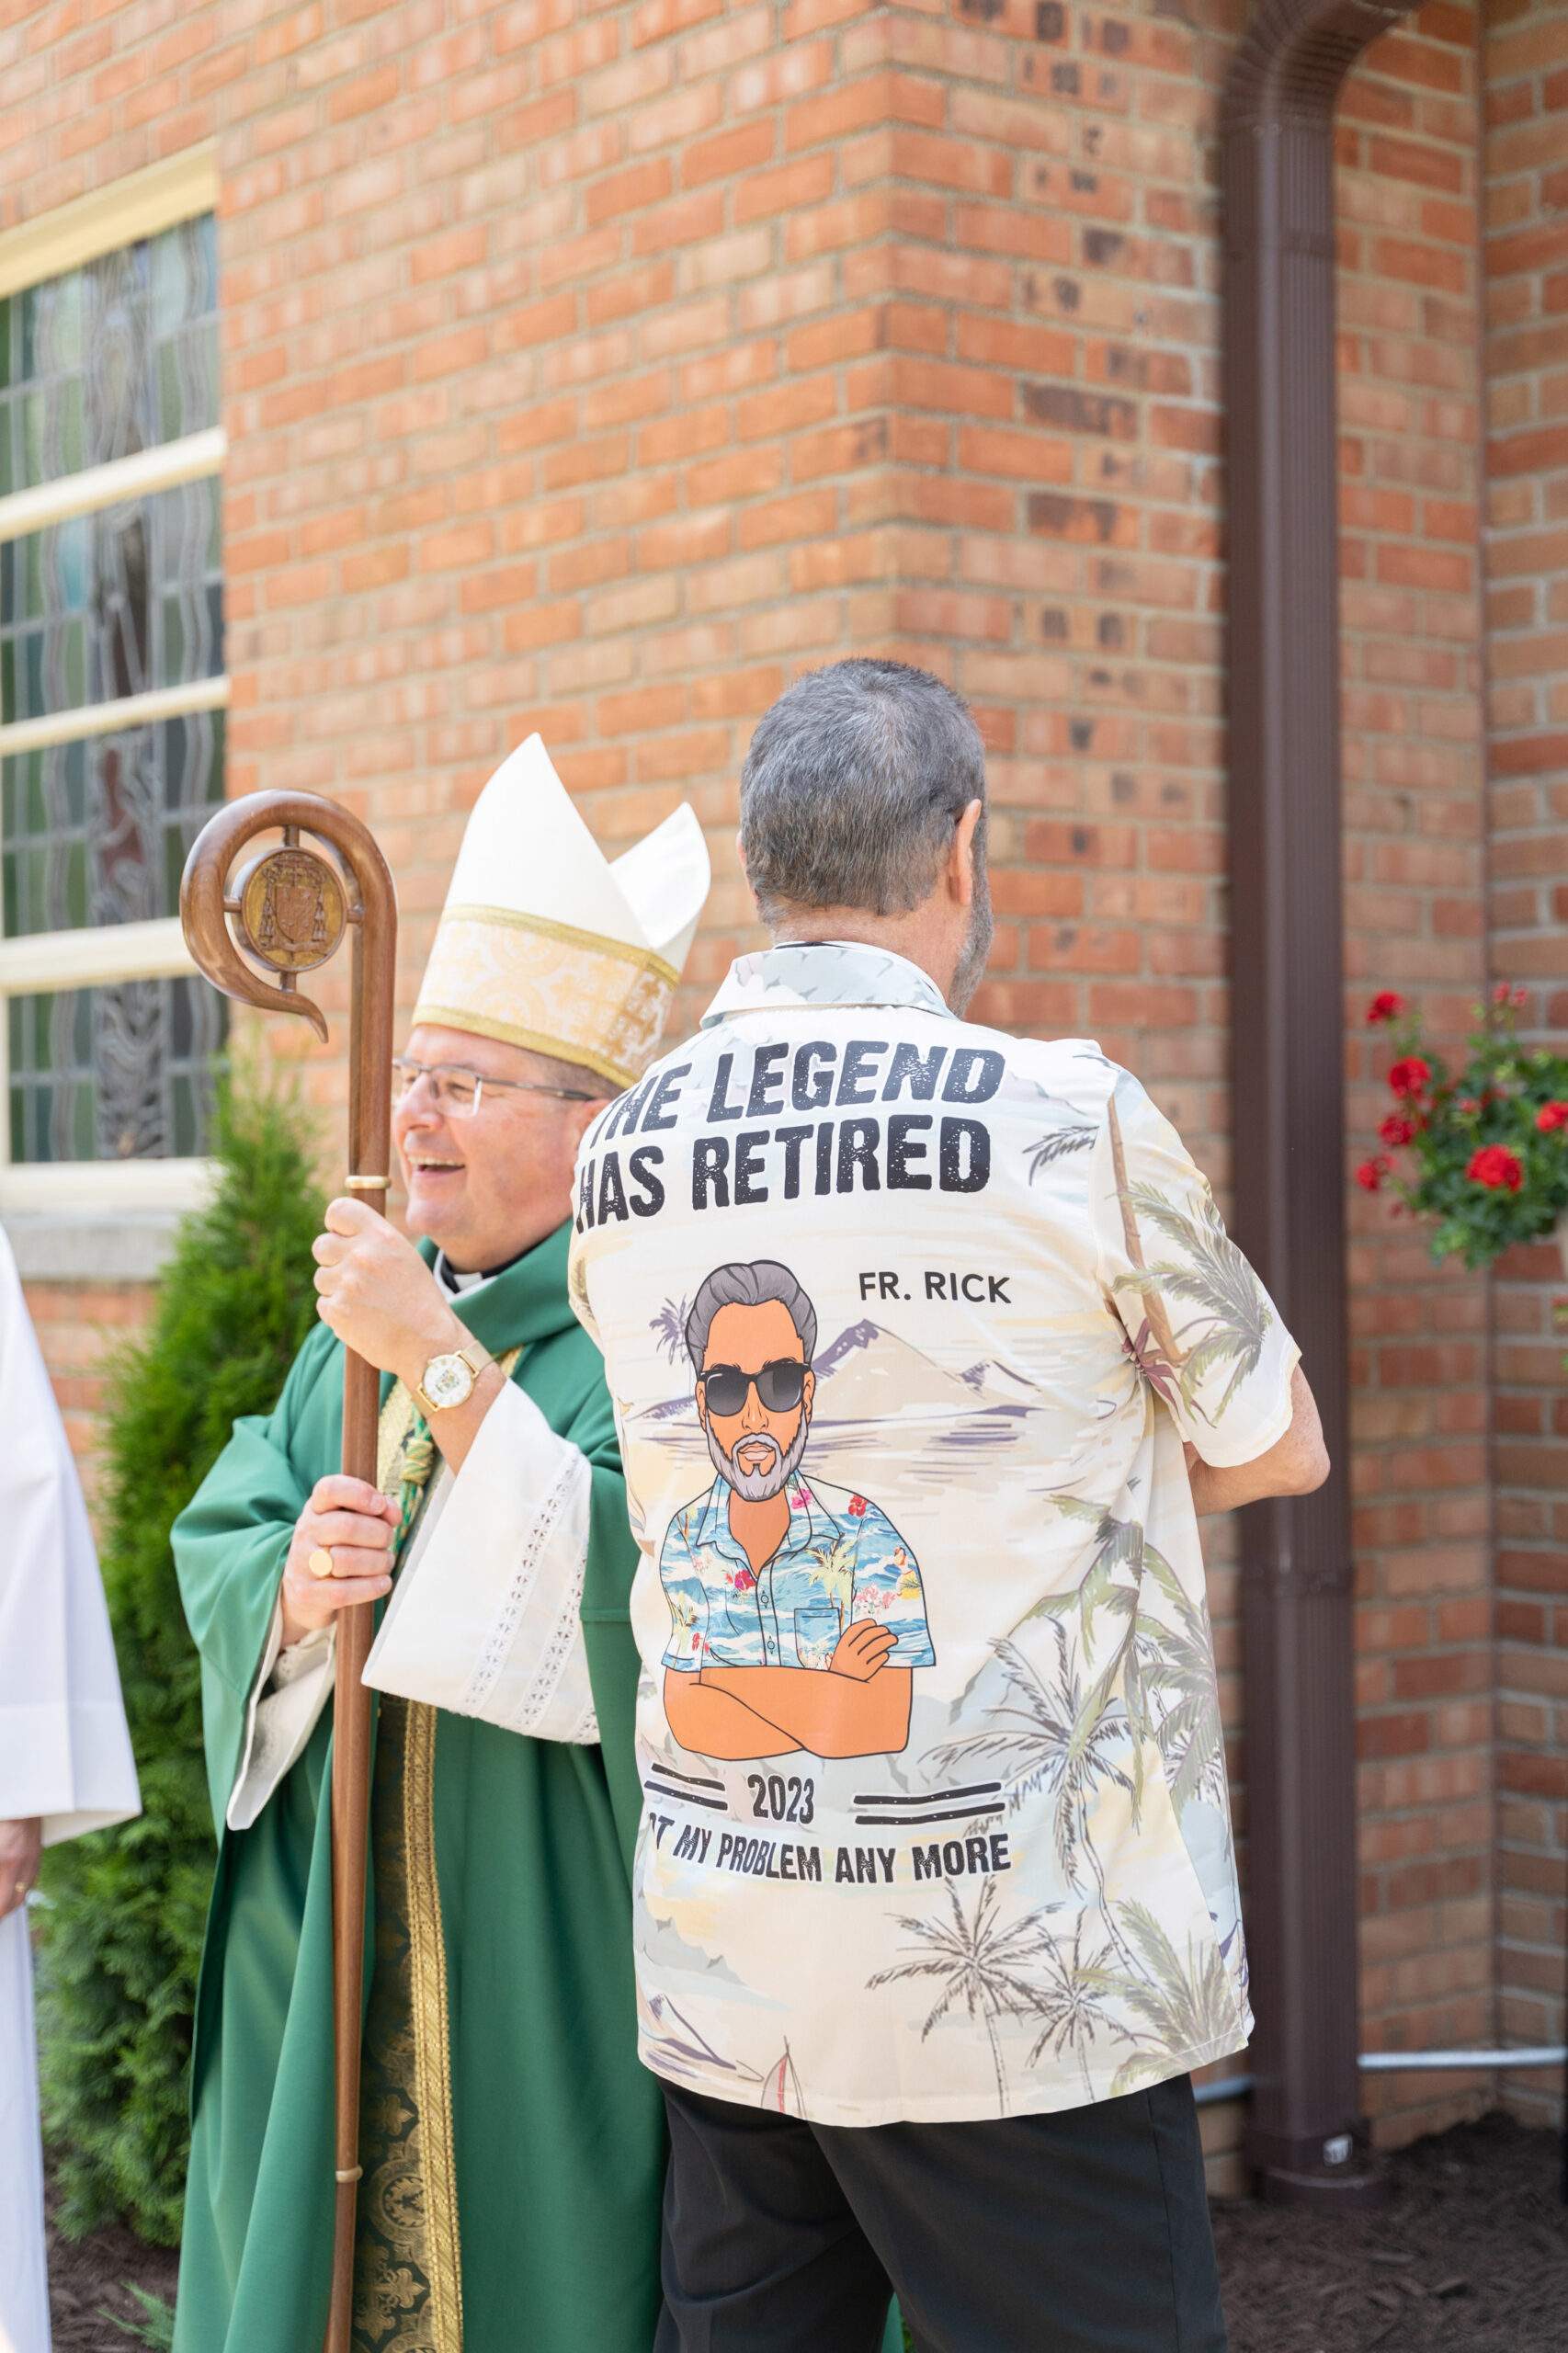 Father Richard Pentello after his retirement Mass, wearing a custom-made Hawaiian shirt stating "The legend has retired."